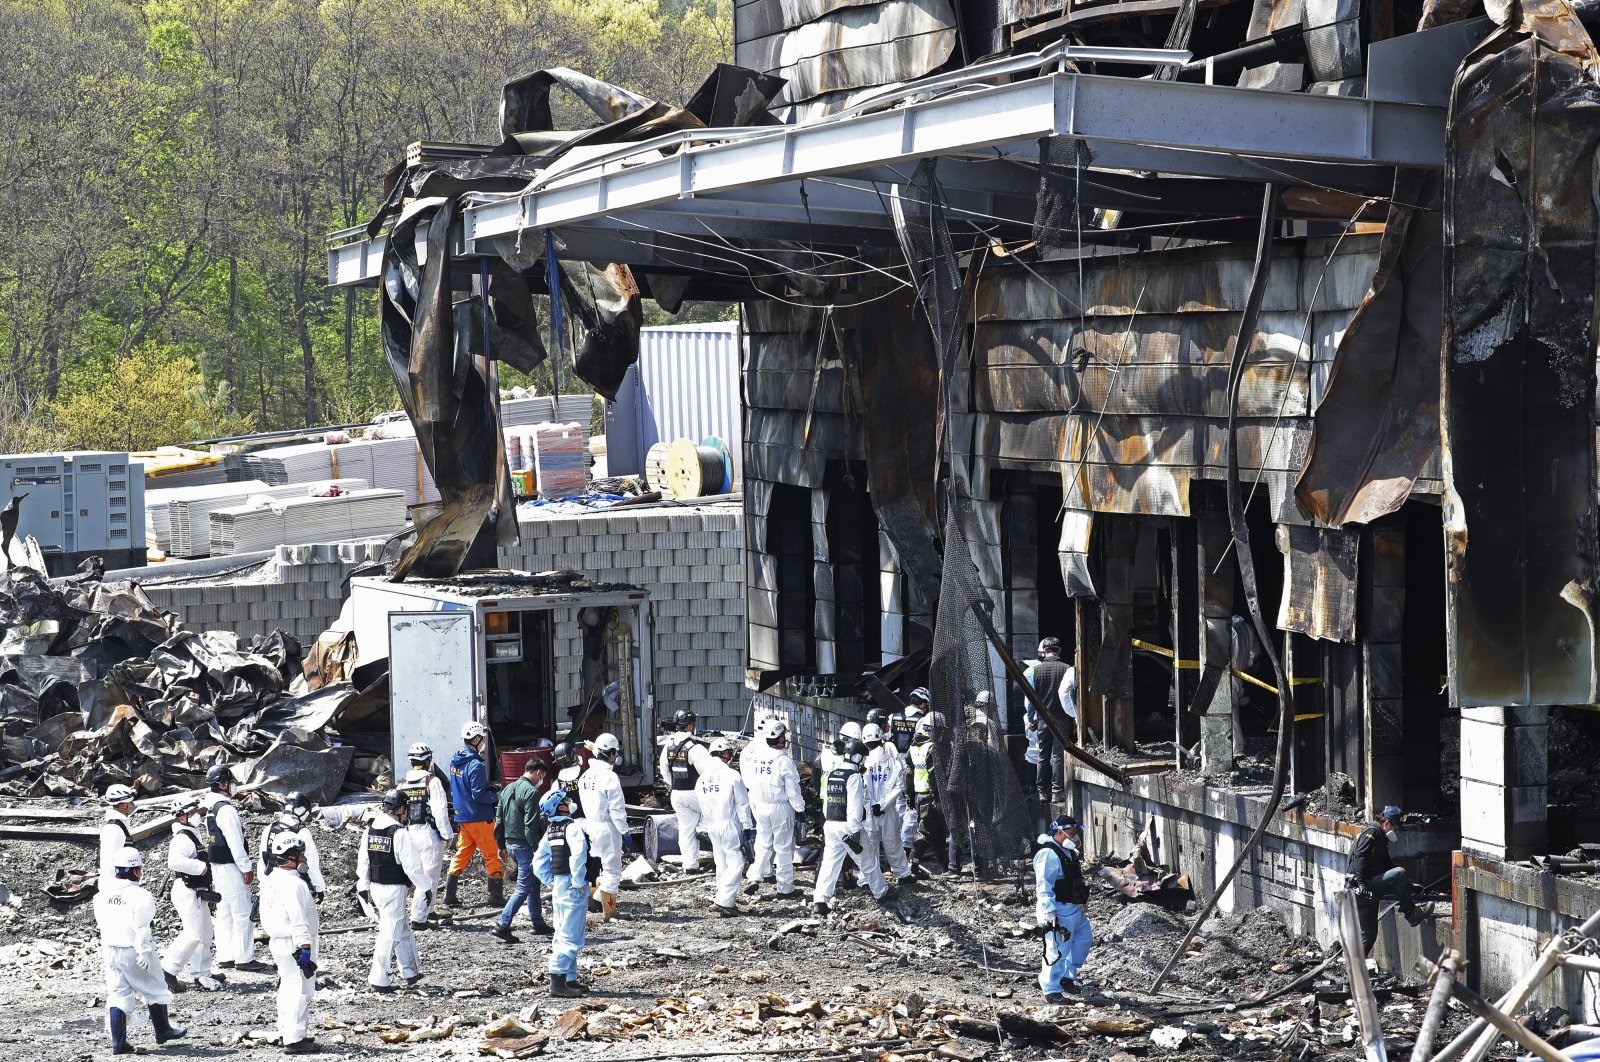 Police investigators enter to inspect a burnt construction site after a fire in Icheon, South Korea, Thursday, April 30, 2020. (AP Photo)